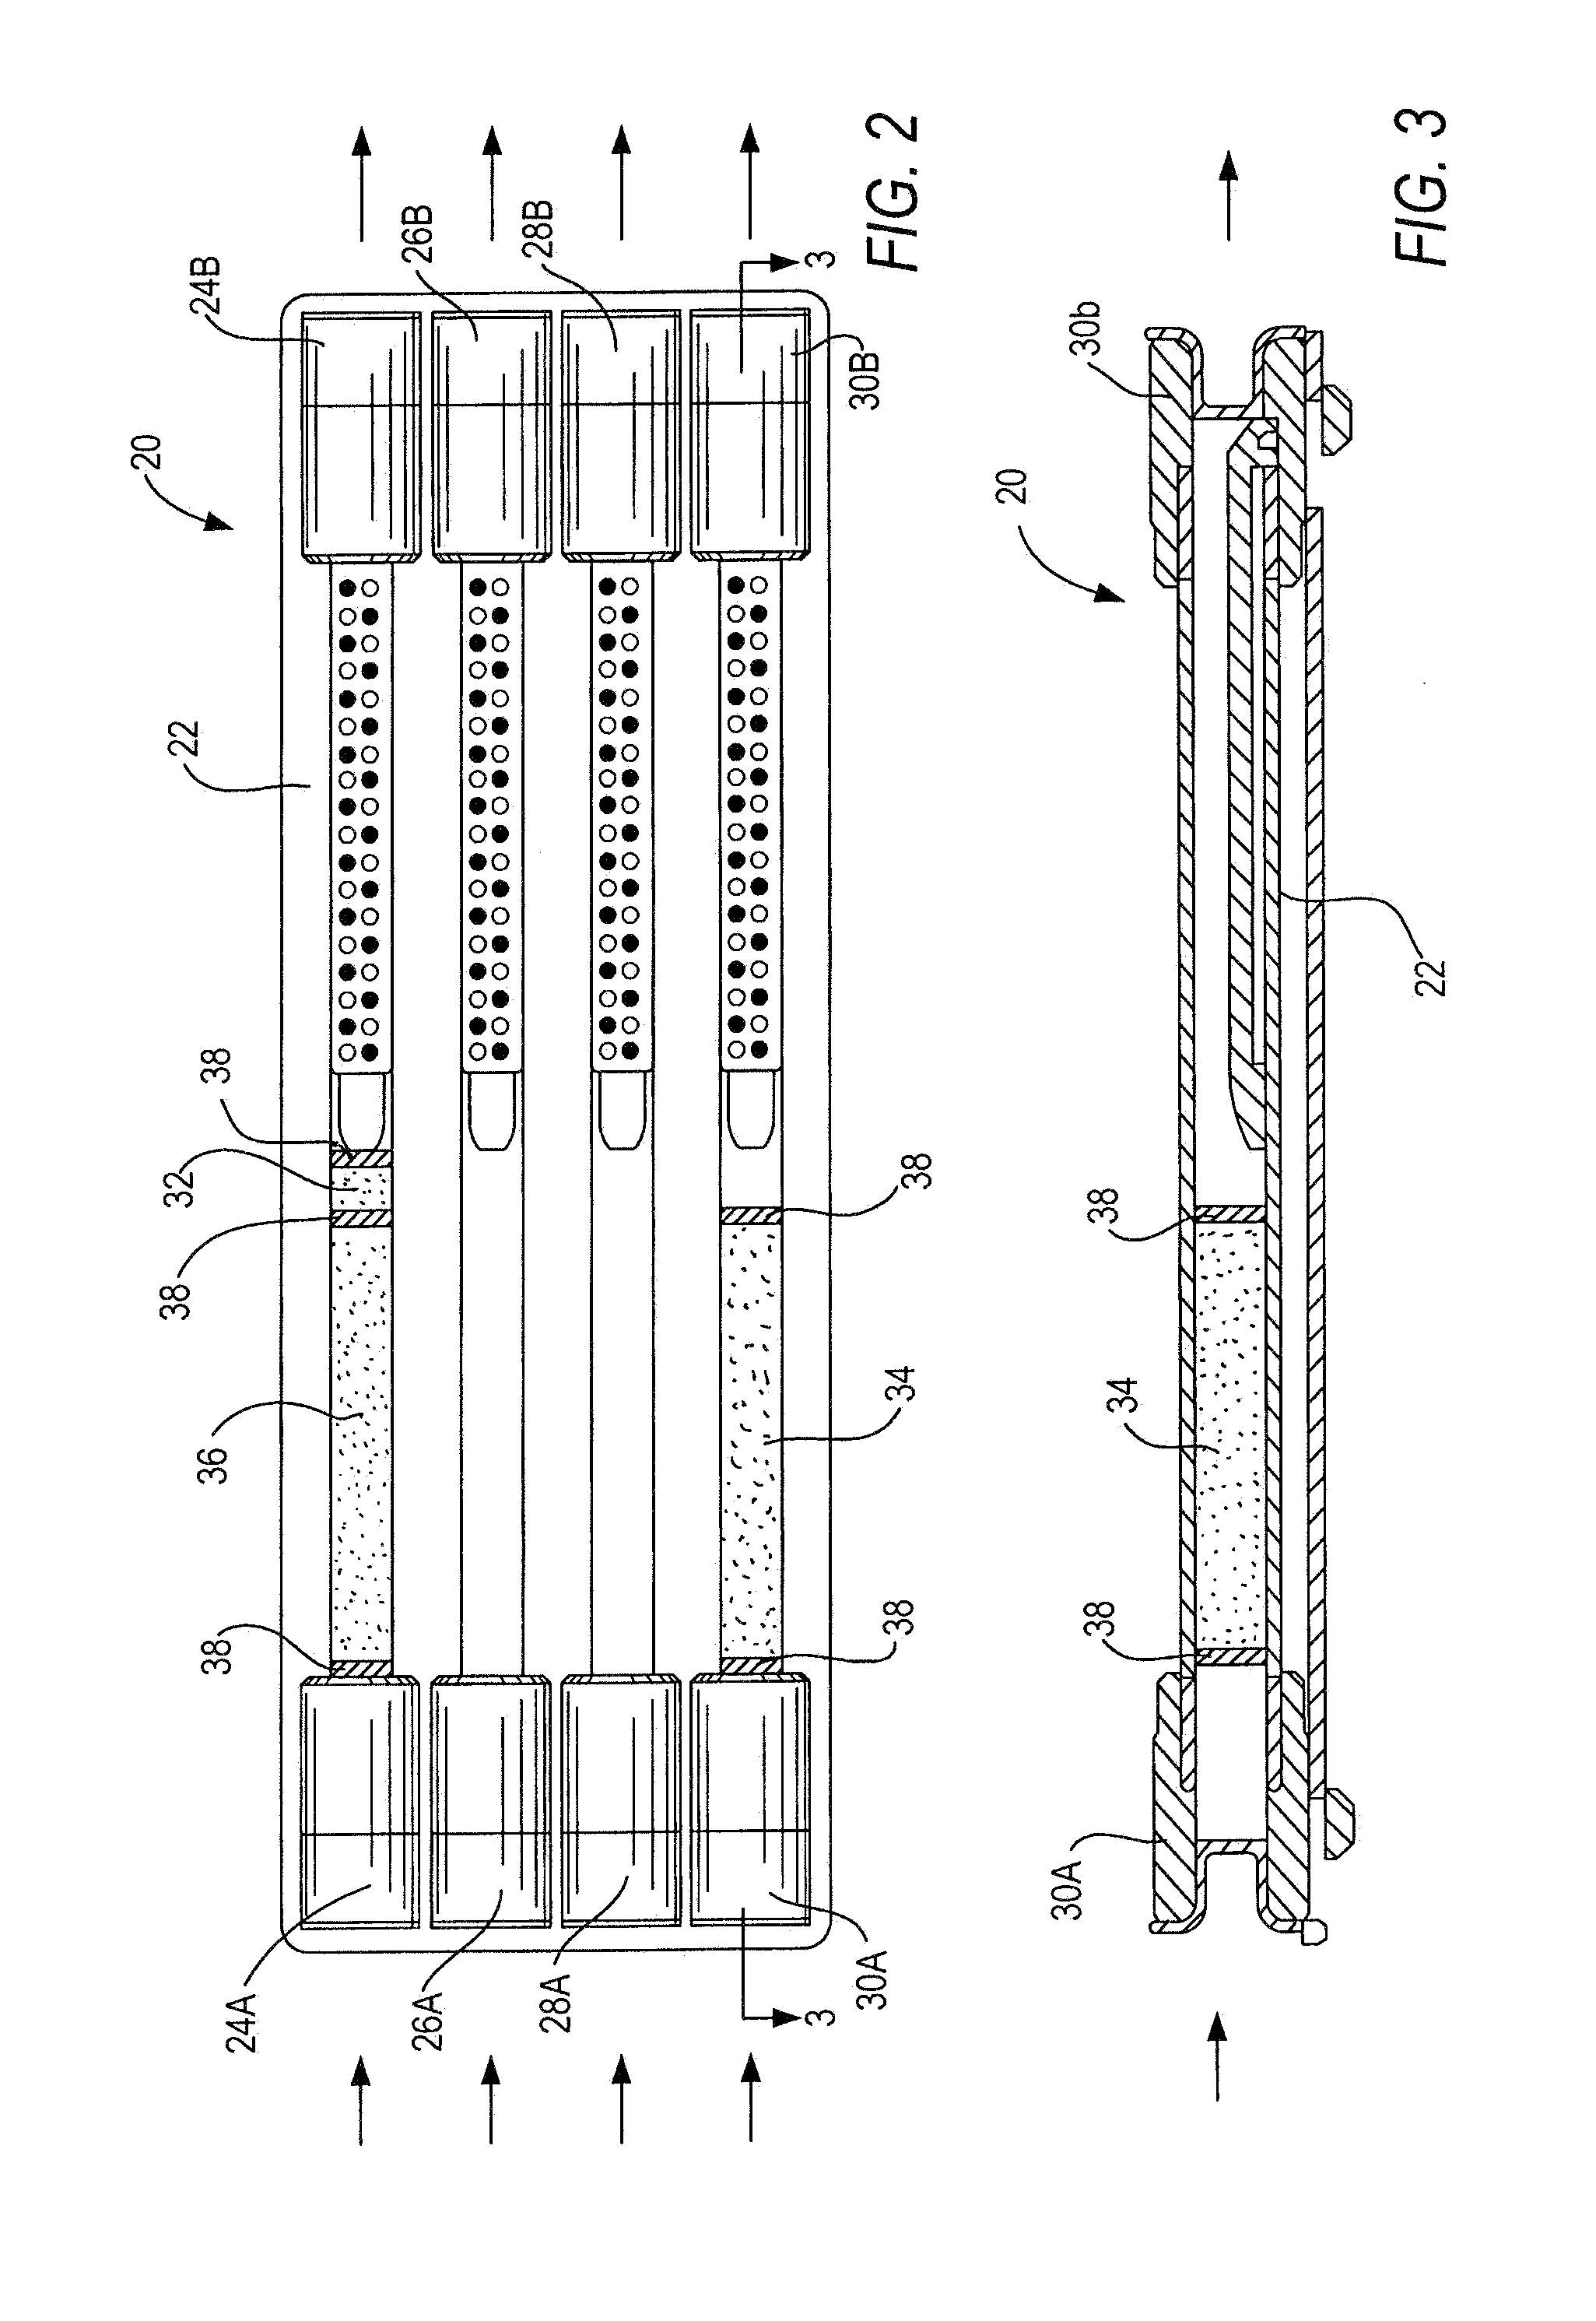 Method of and apparatus for detecting upper respiratory bacterial infection from exhaled mammalian breath and colorimetric sensor array cartridge